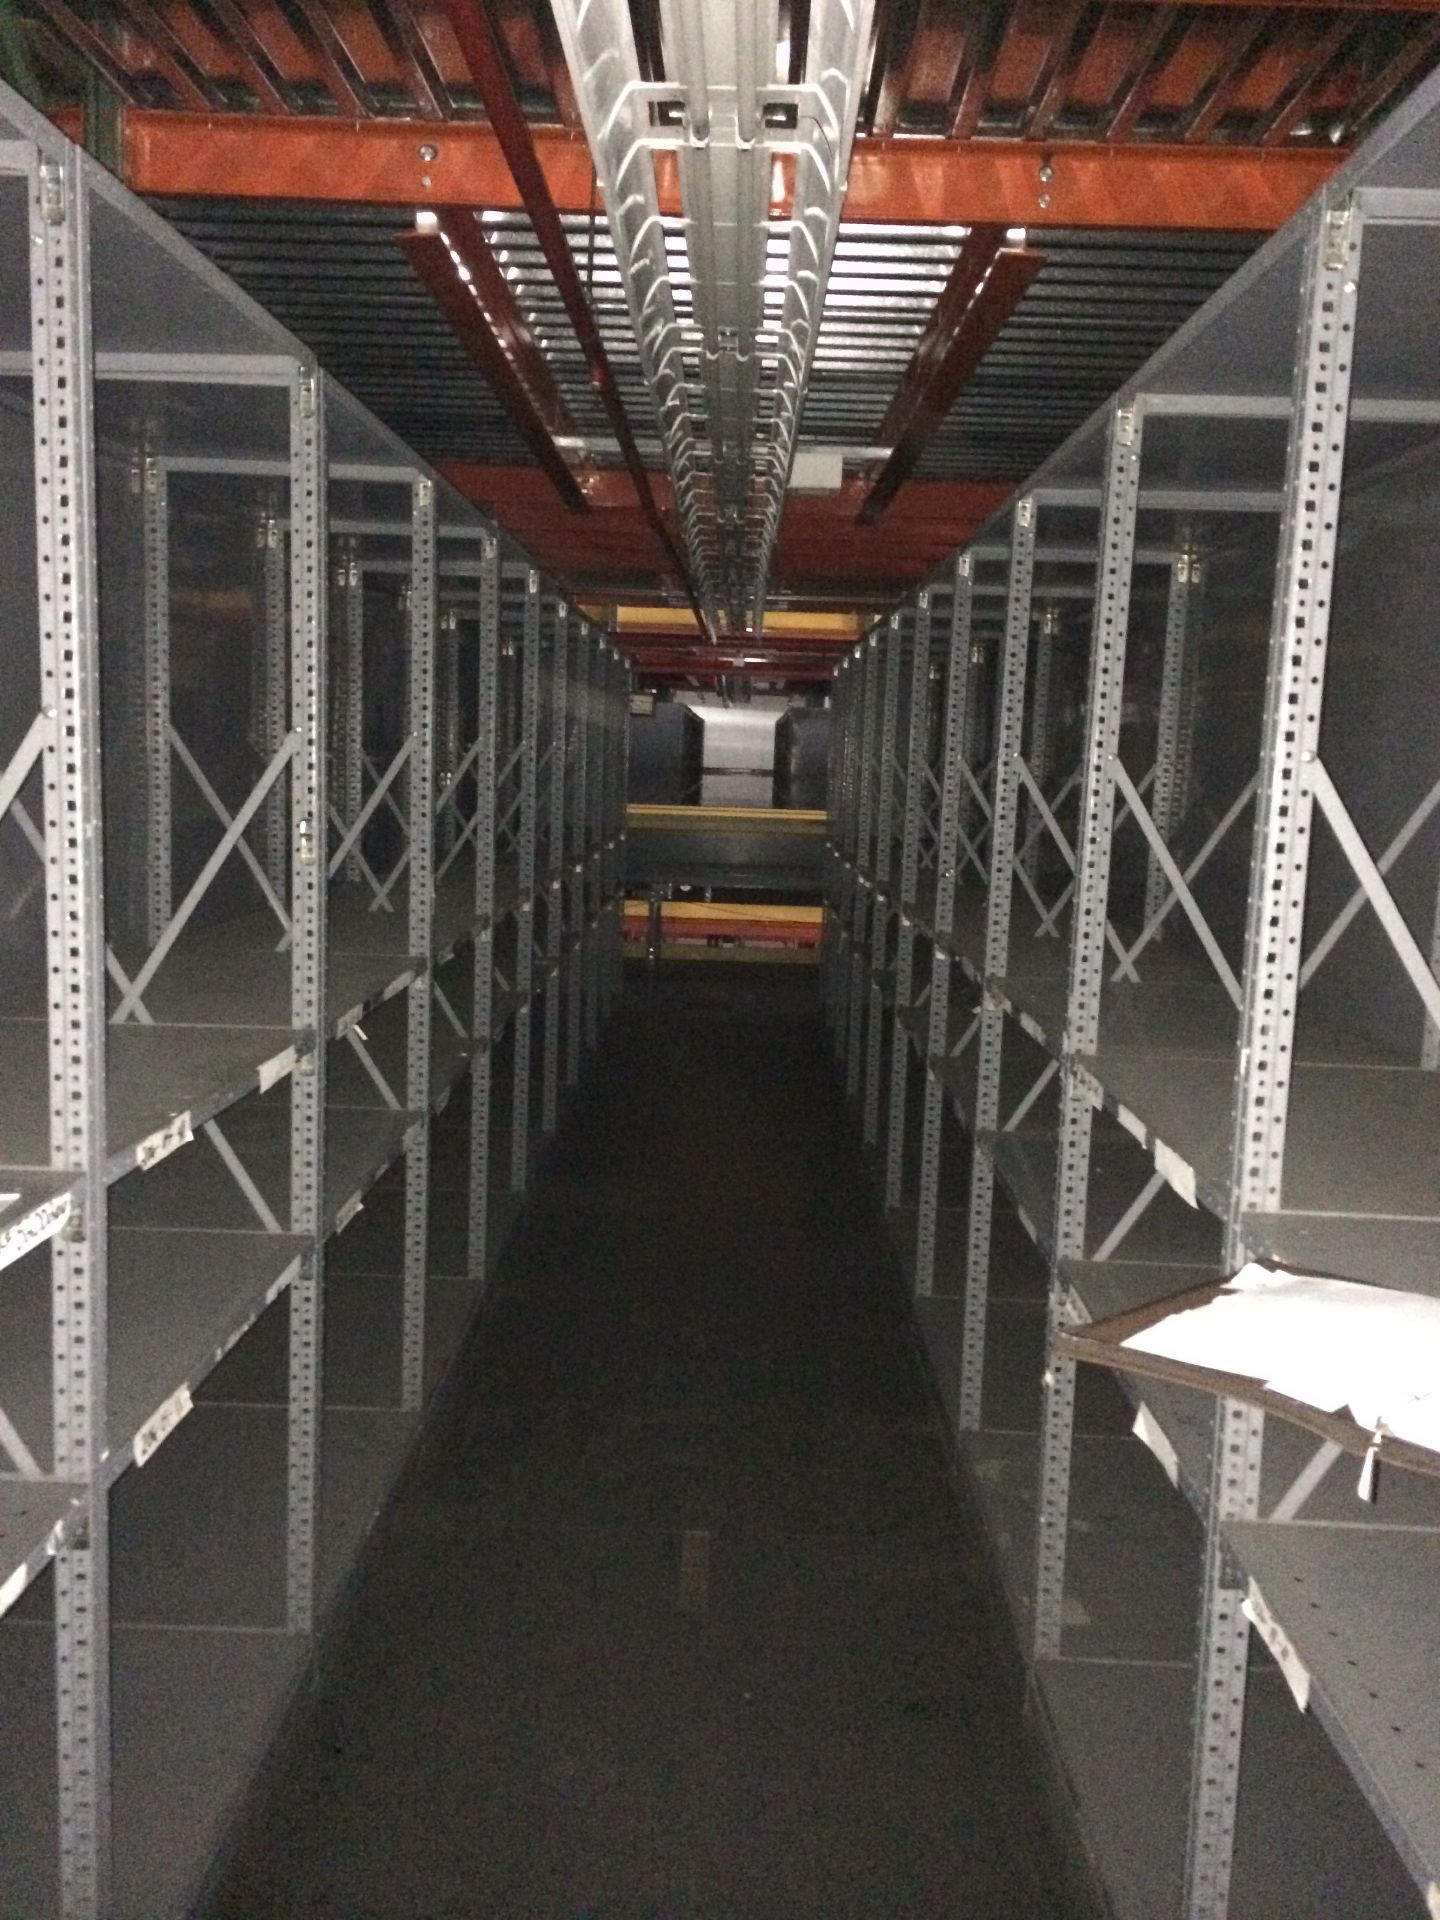 60 SECTIONS OF CLOSED BACK INDUSTRIAL CLIP SHELVING, SHELF SIZE 24"D X 36"W  EACH SIZE: 24"D X 36" - Image 2 of 4